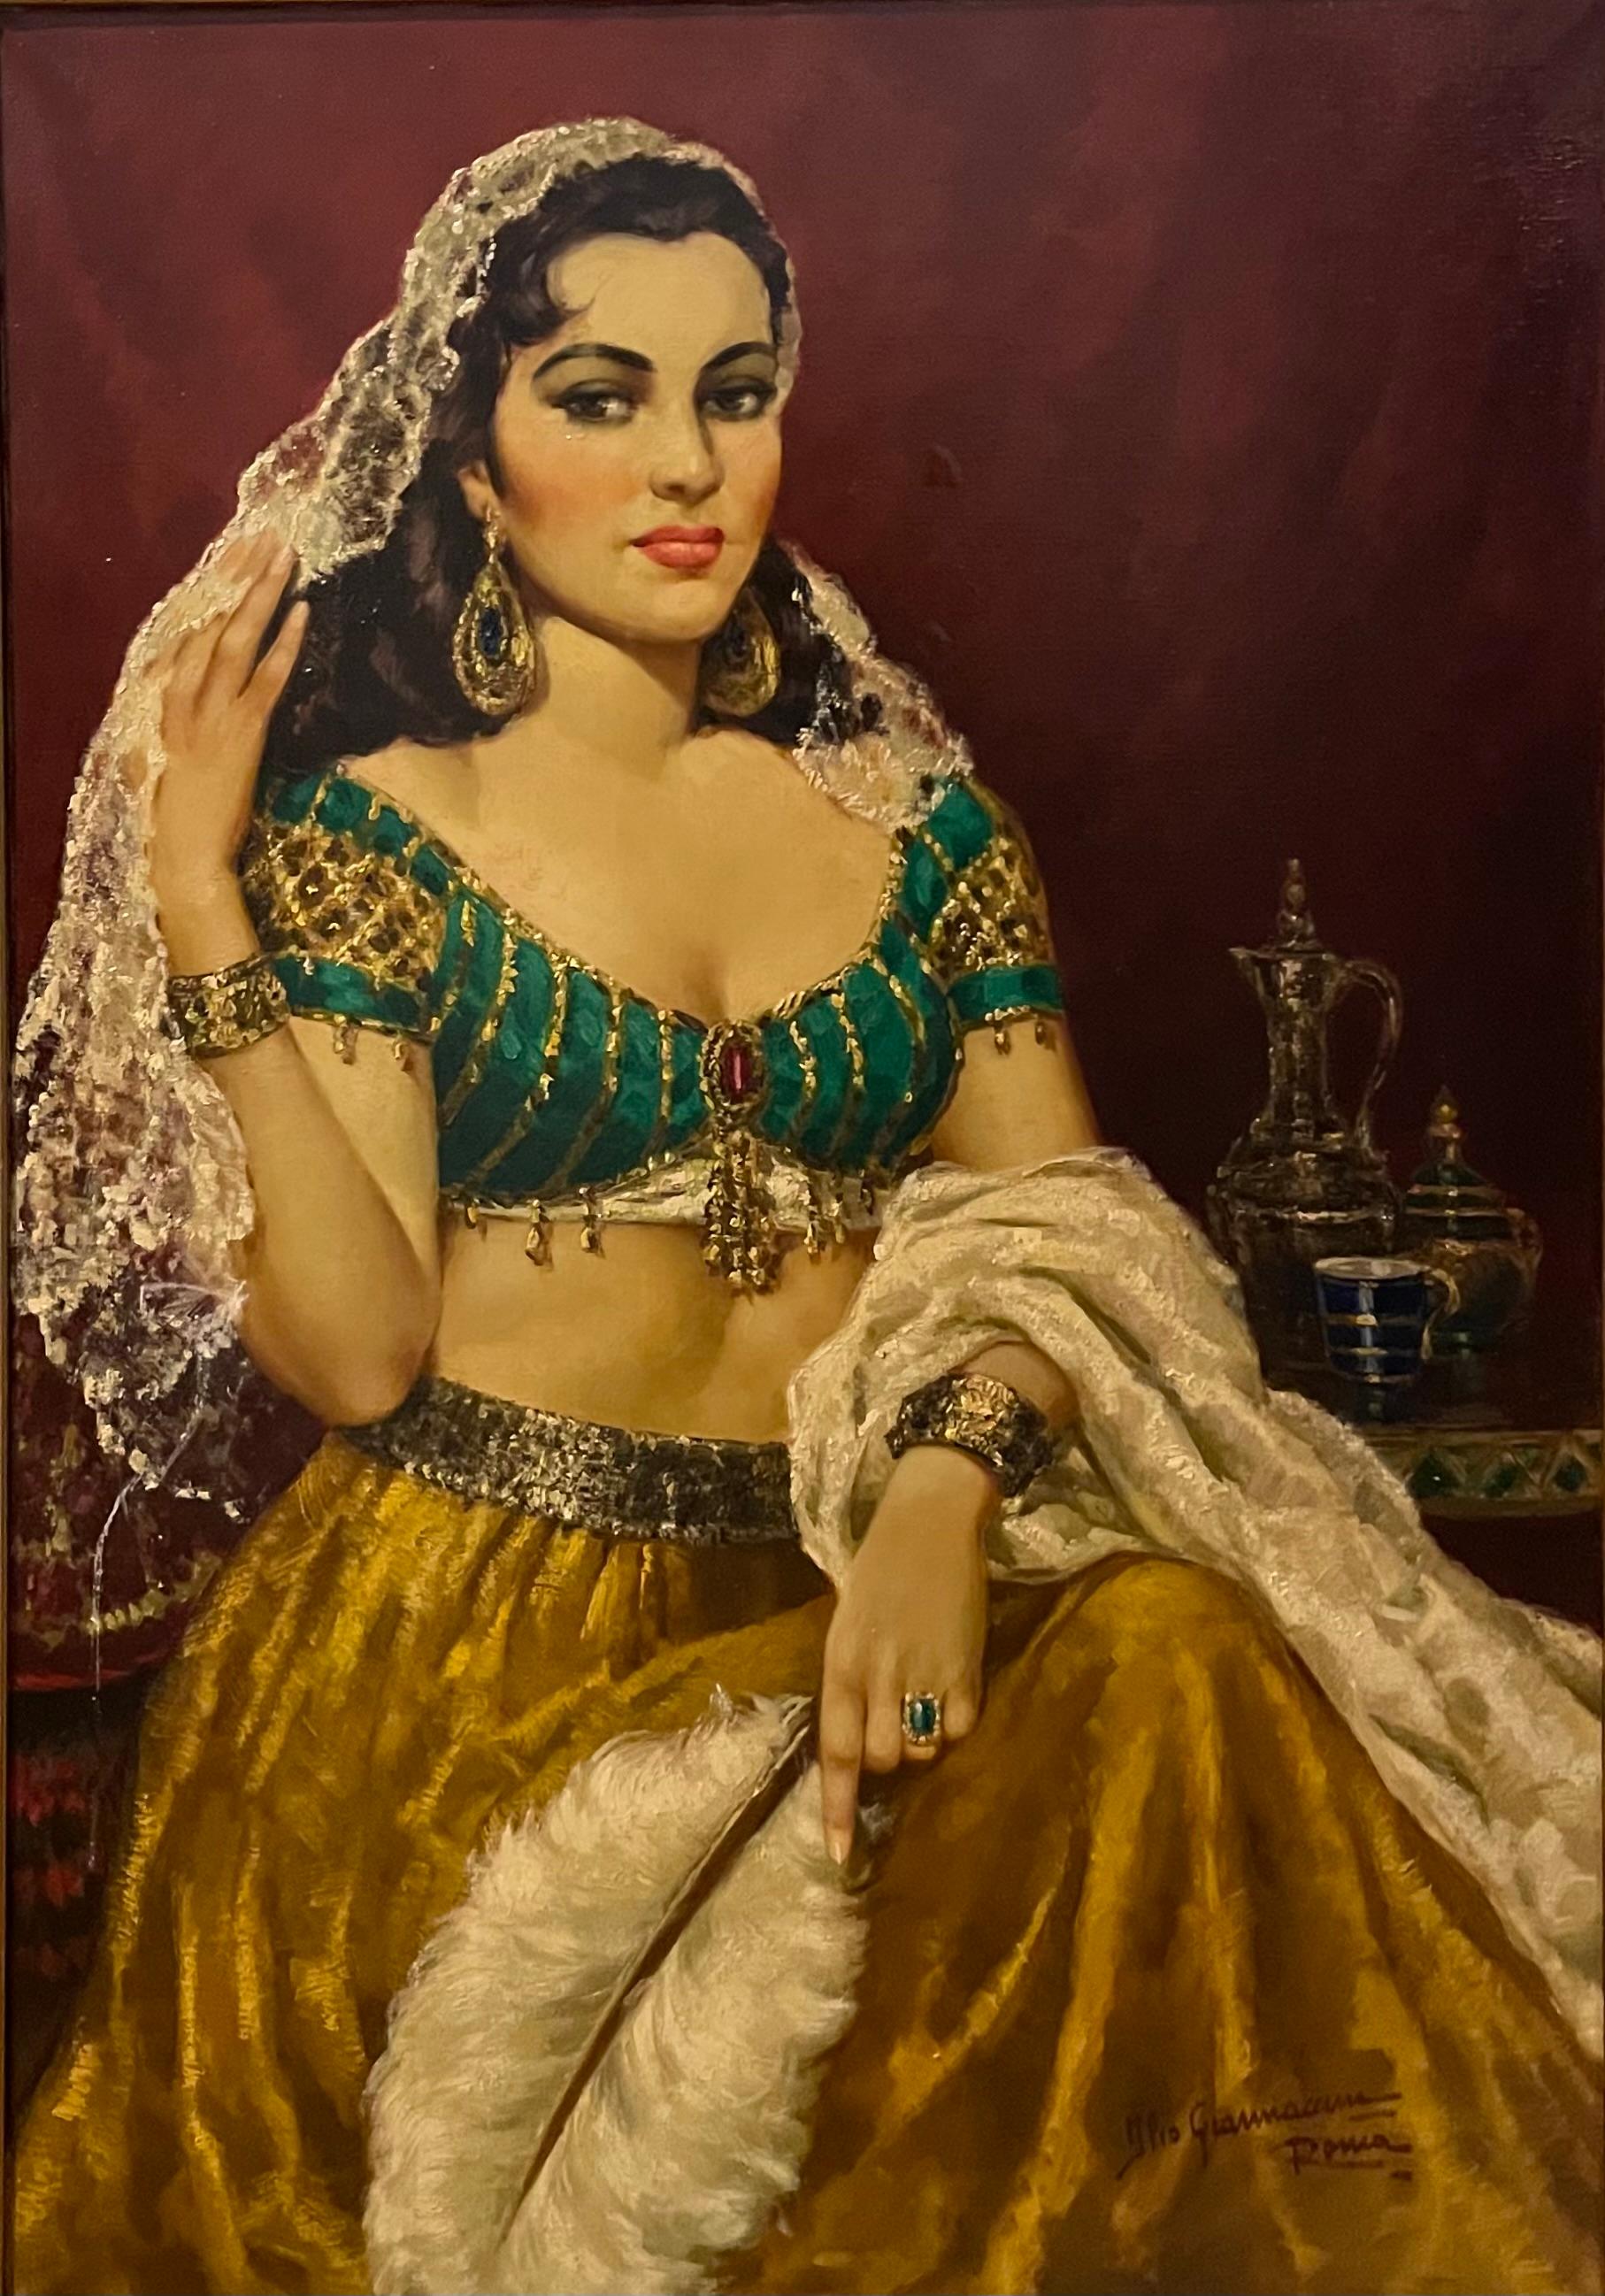 Untitled (Portrait of a Belly Dancer)